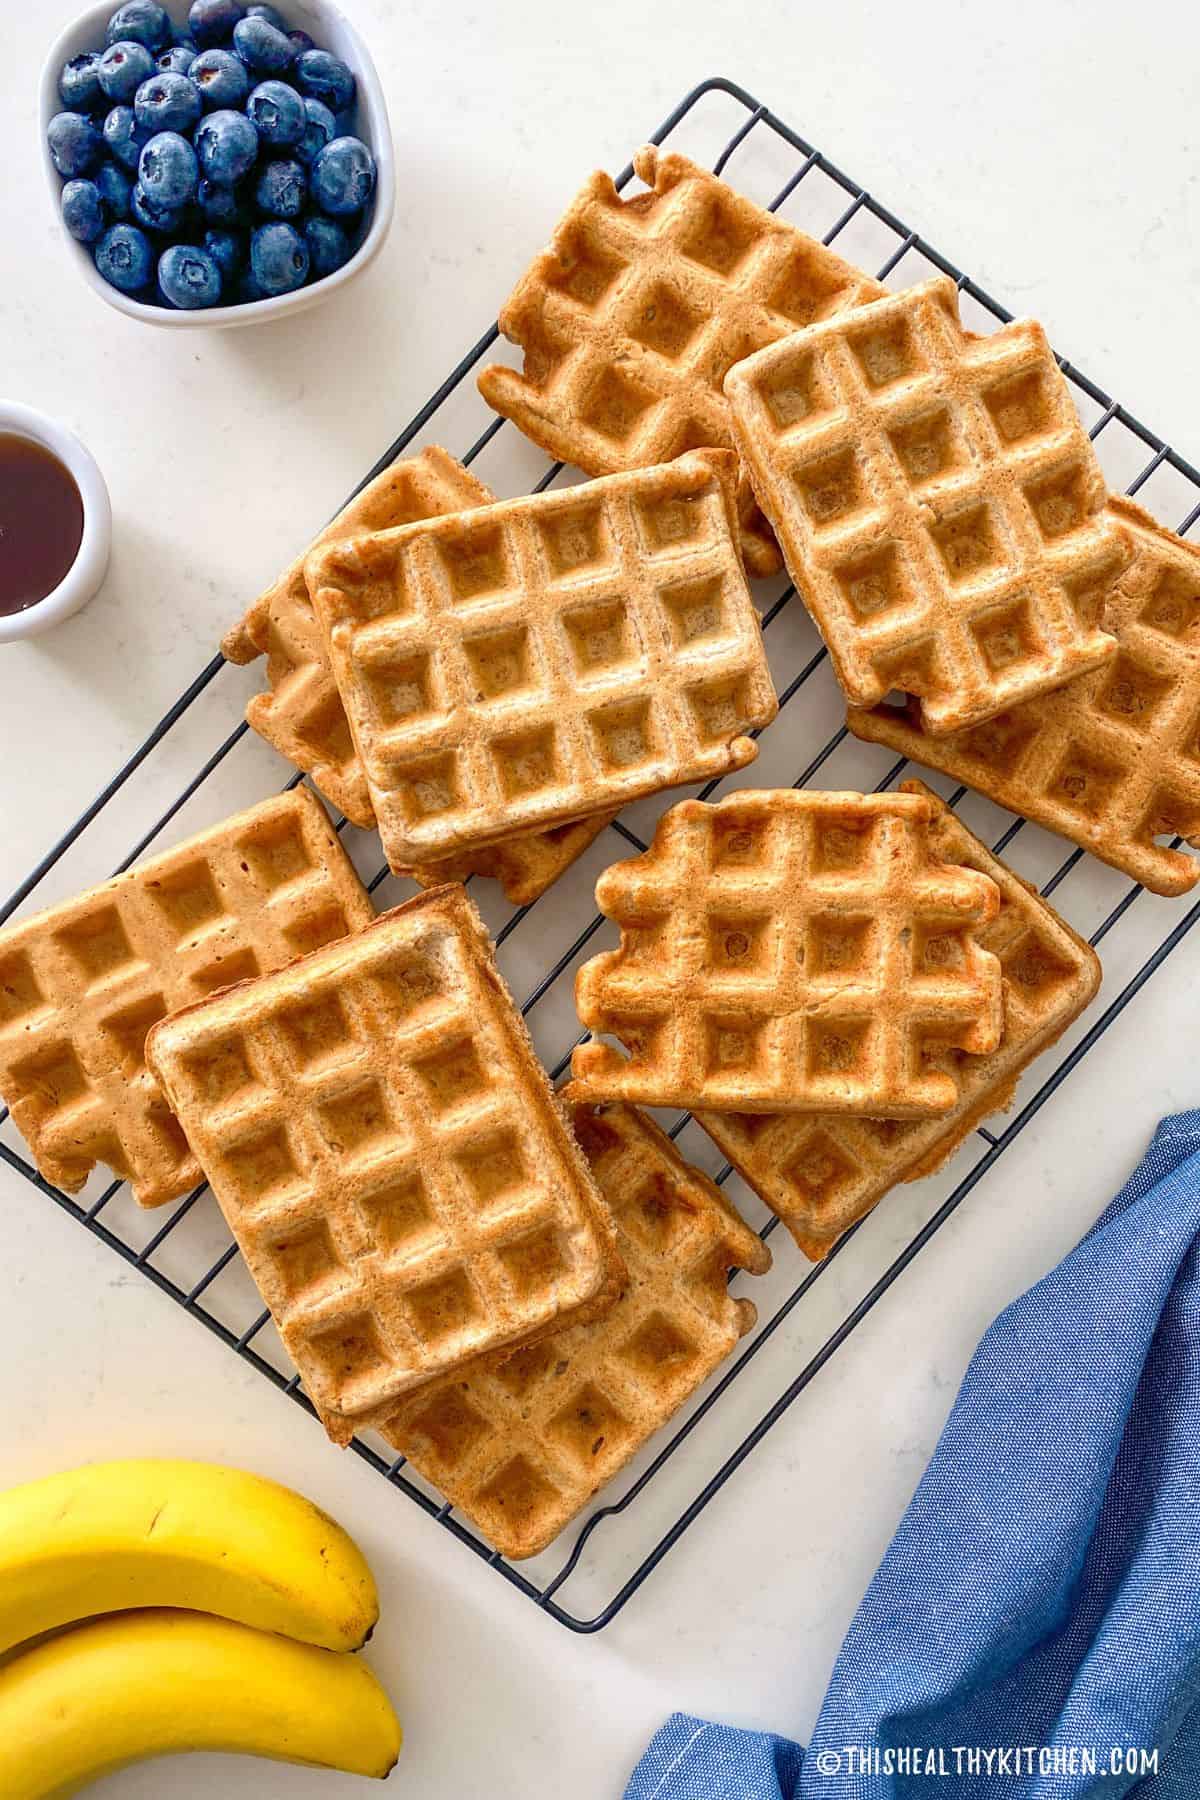 Cooling rack with 10 waffles on top and bowl of blueberries on the side.